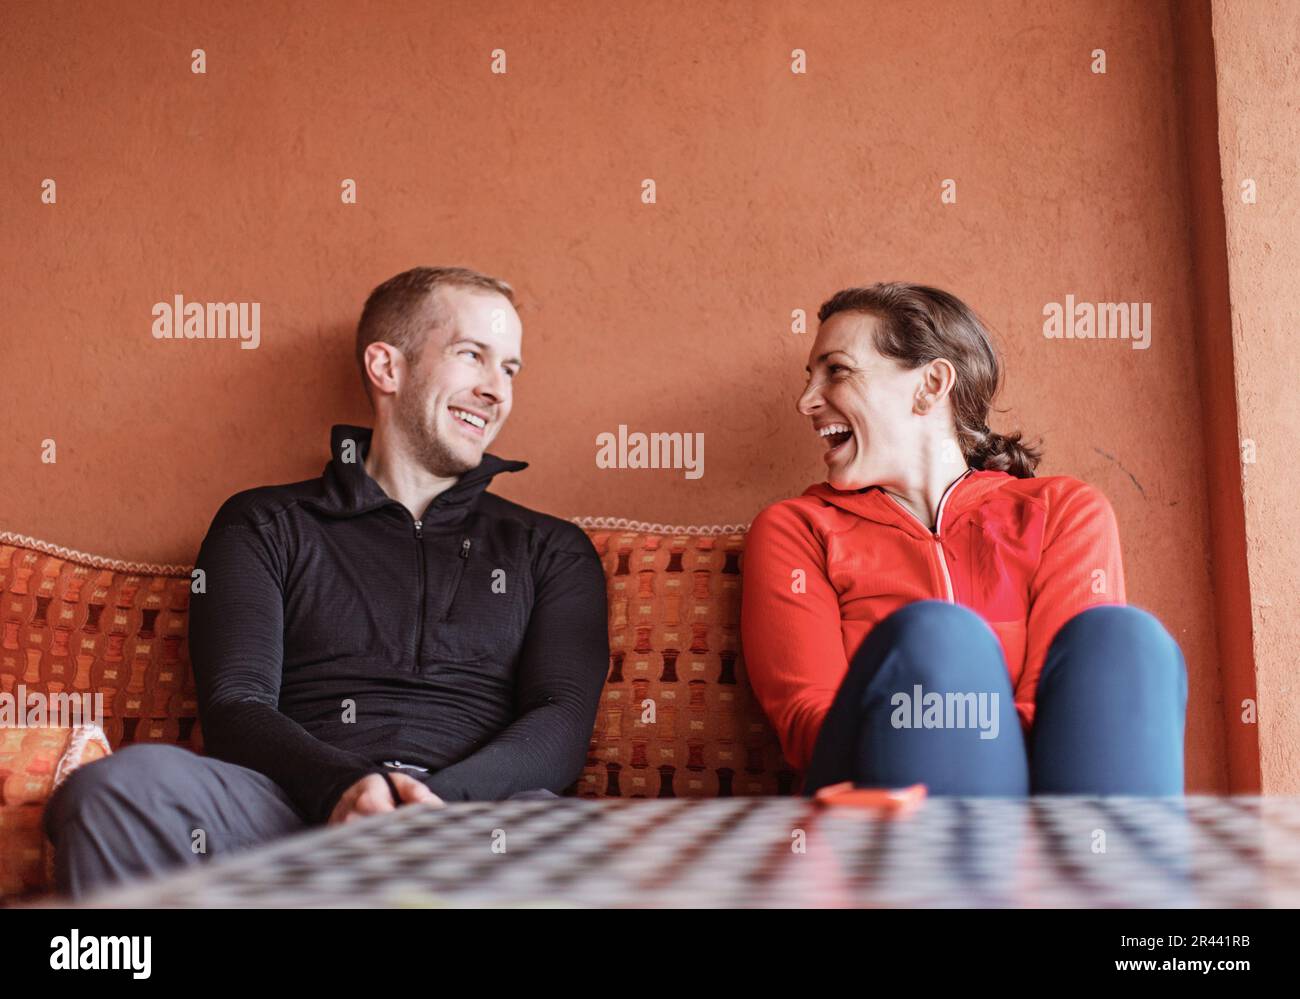 A couple smile at each other while sitting on a couch in Morocco Stock Photo